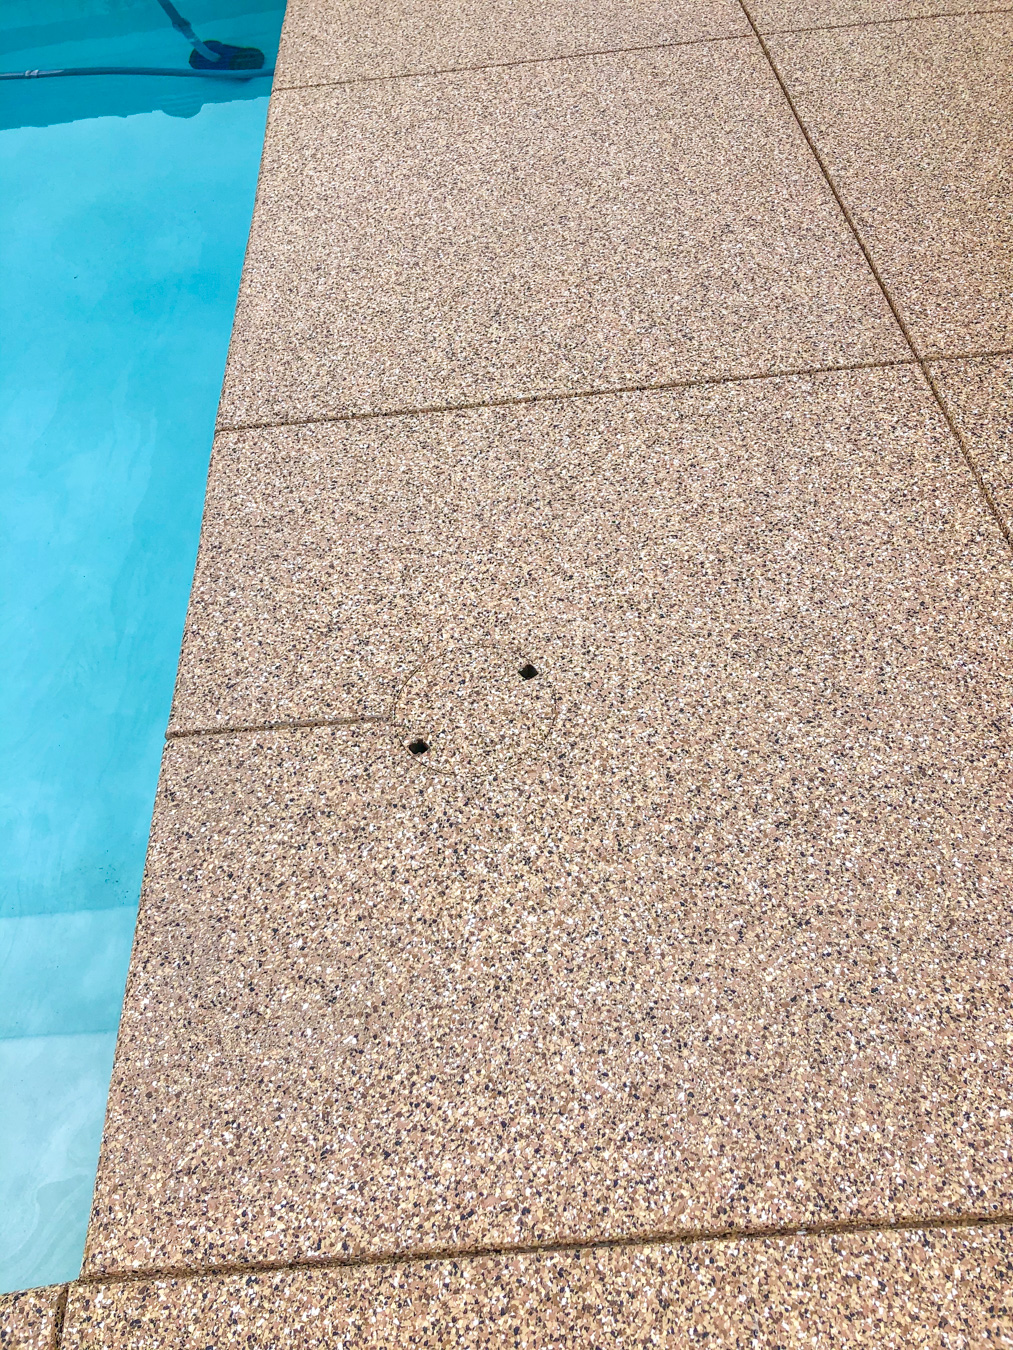 Concrete Coating on a Pool Deck